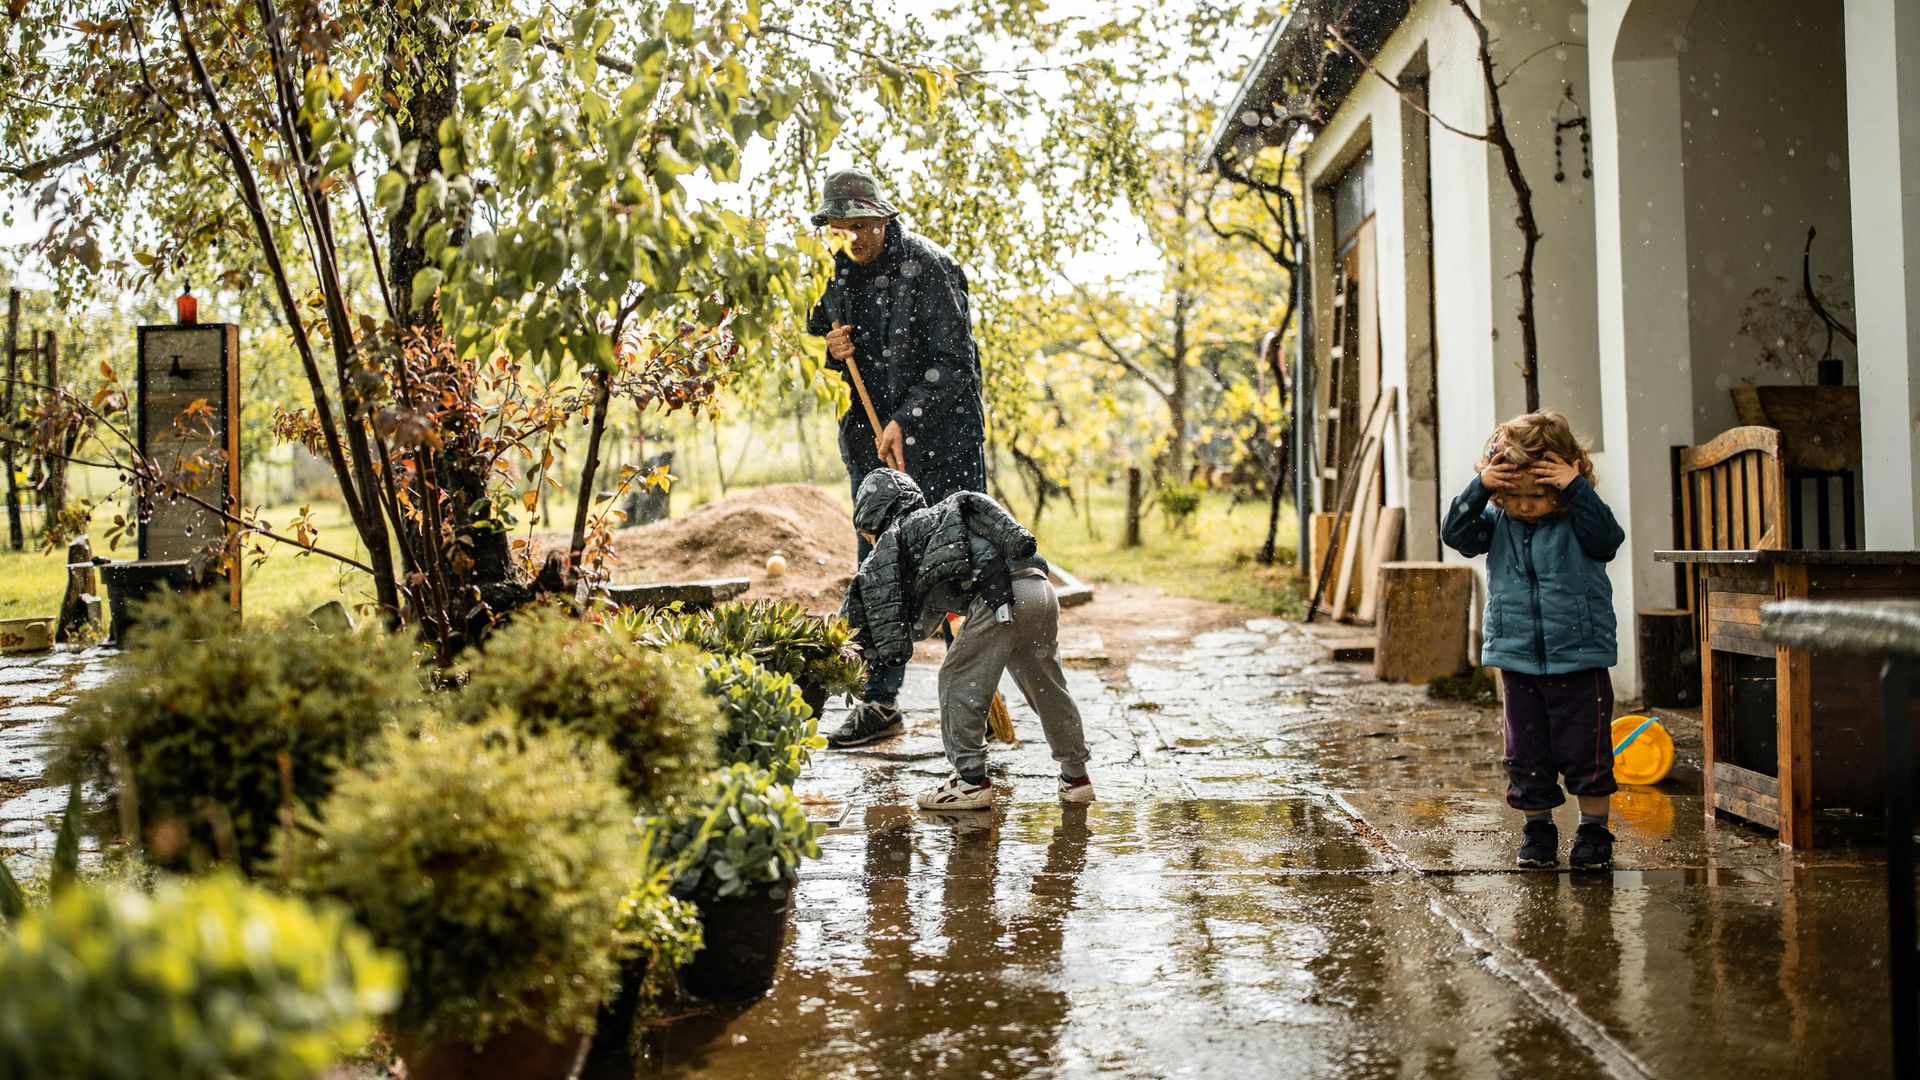 Son helping father and sweeping water from front yard on rainy day